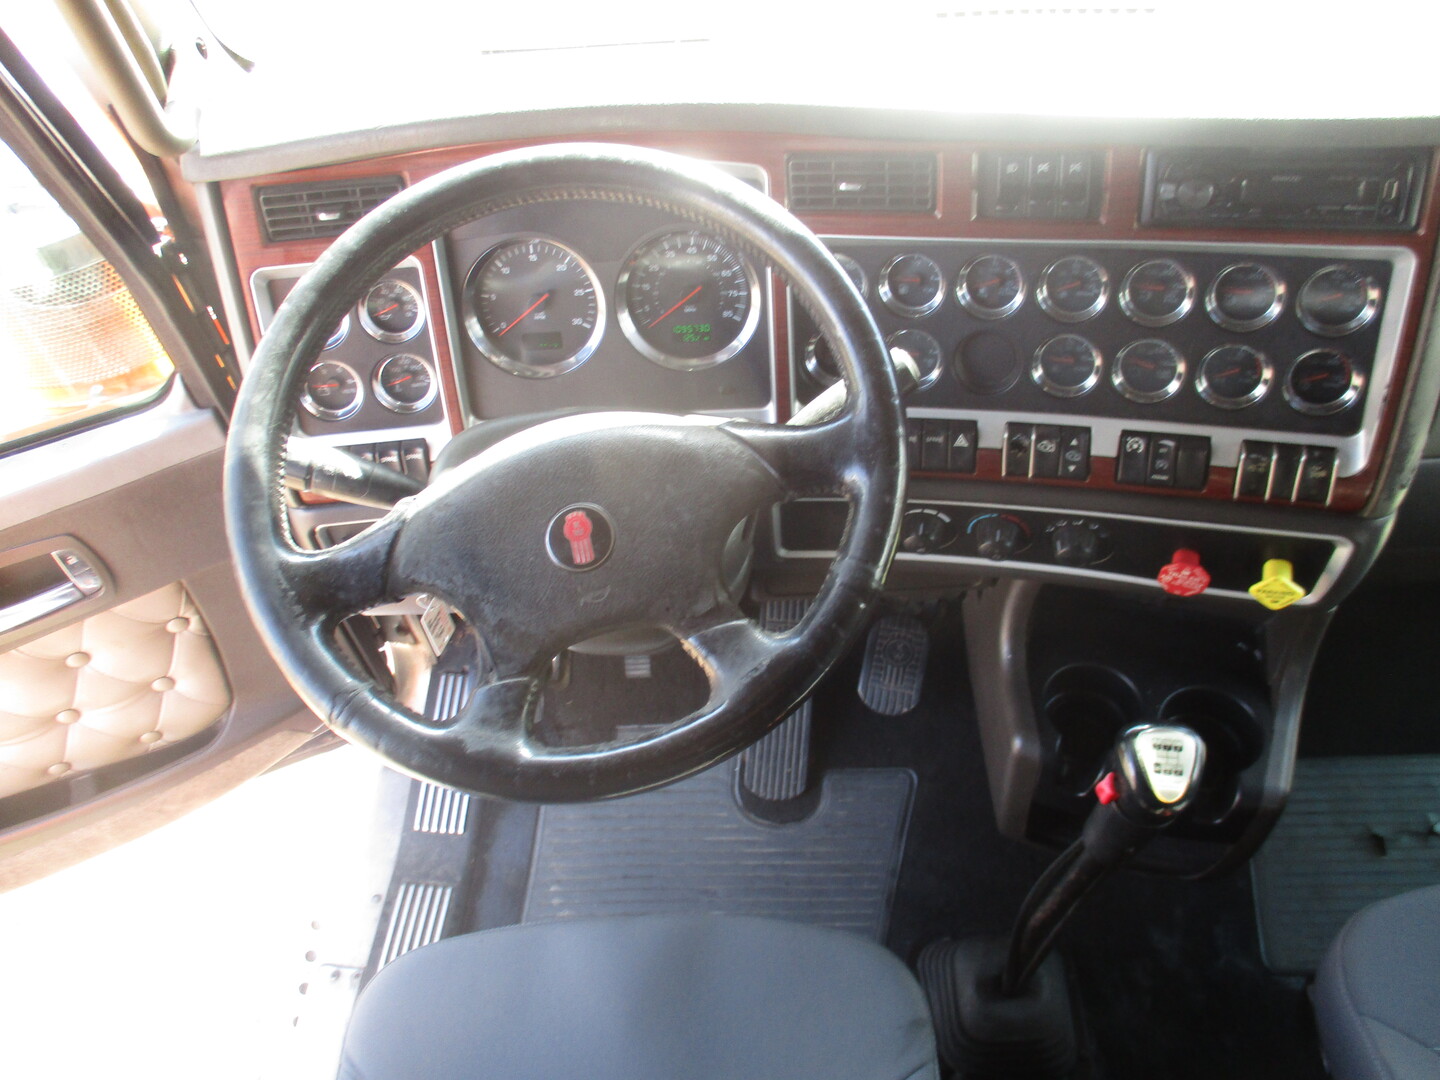 2007 Kenworth W900 This Is Not An Ari